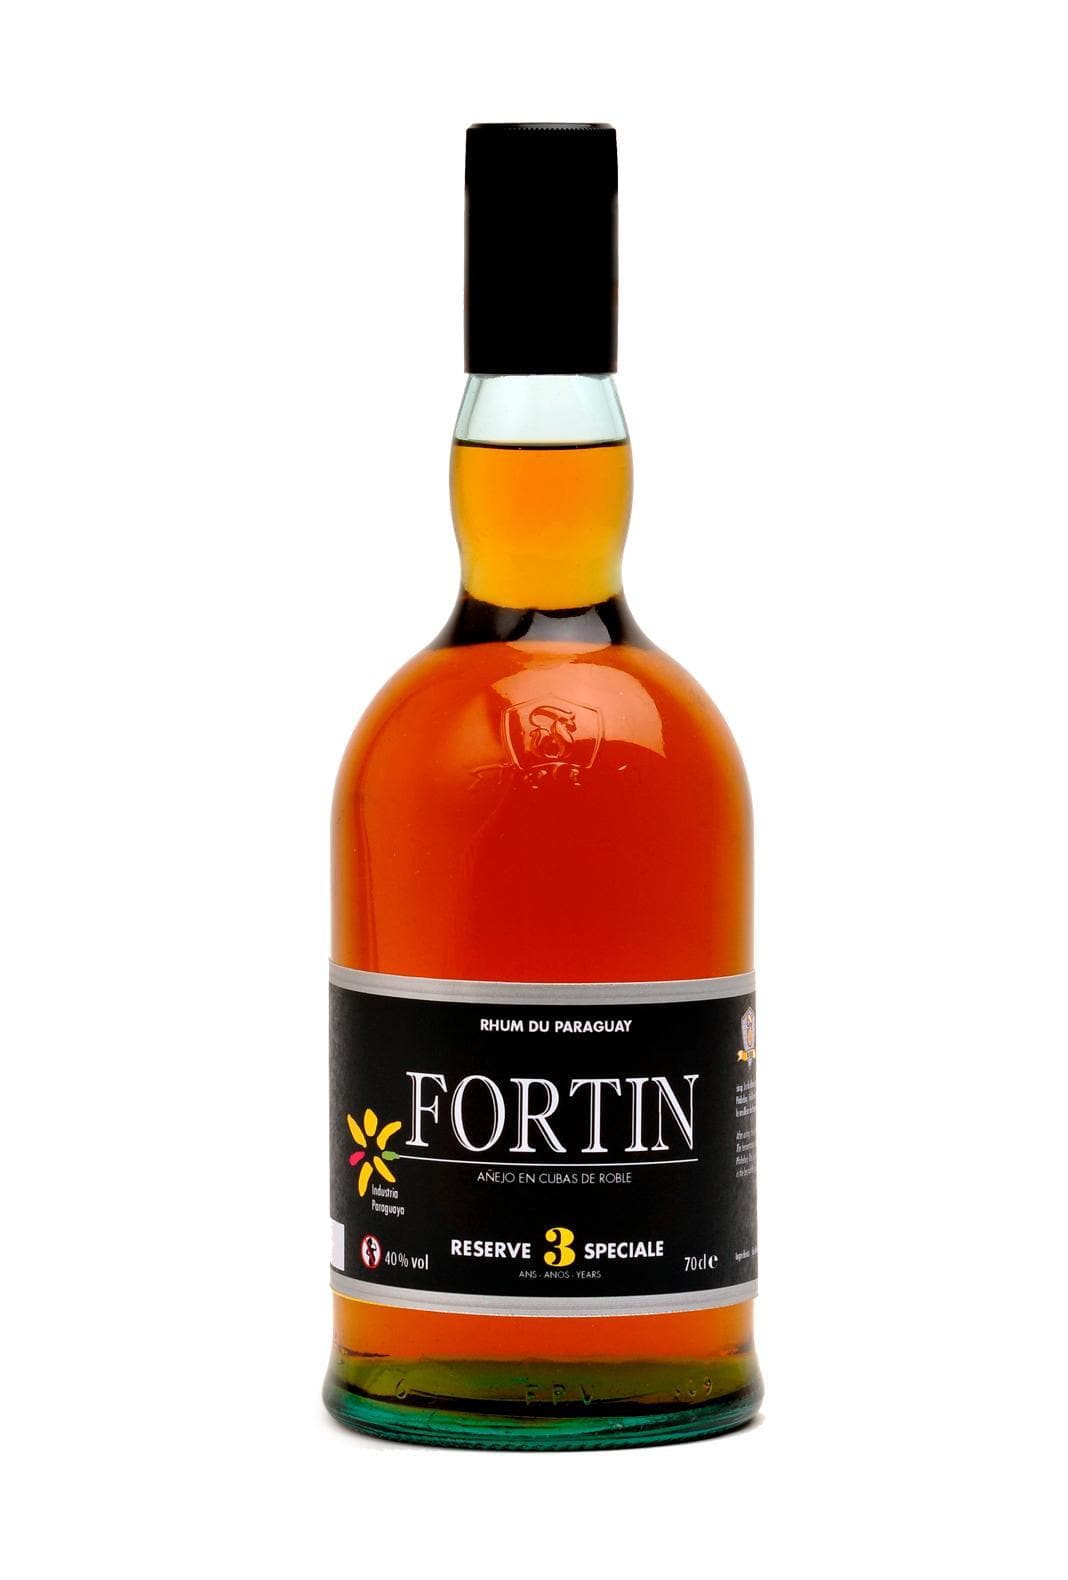 Fortin Rum 3 years Paraguay 40% 700ml | Rum | Shop online at Spirits of France